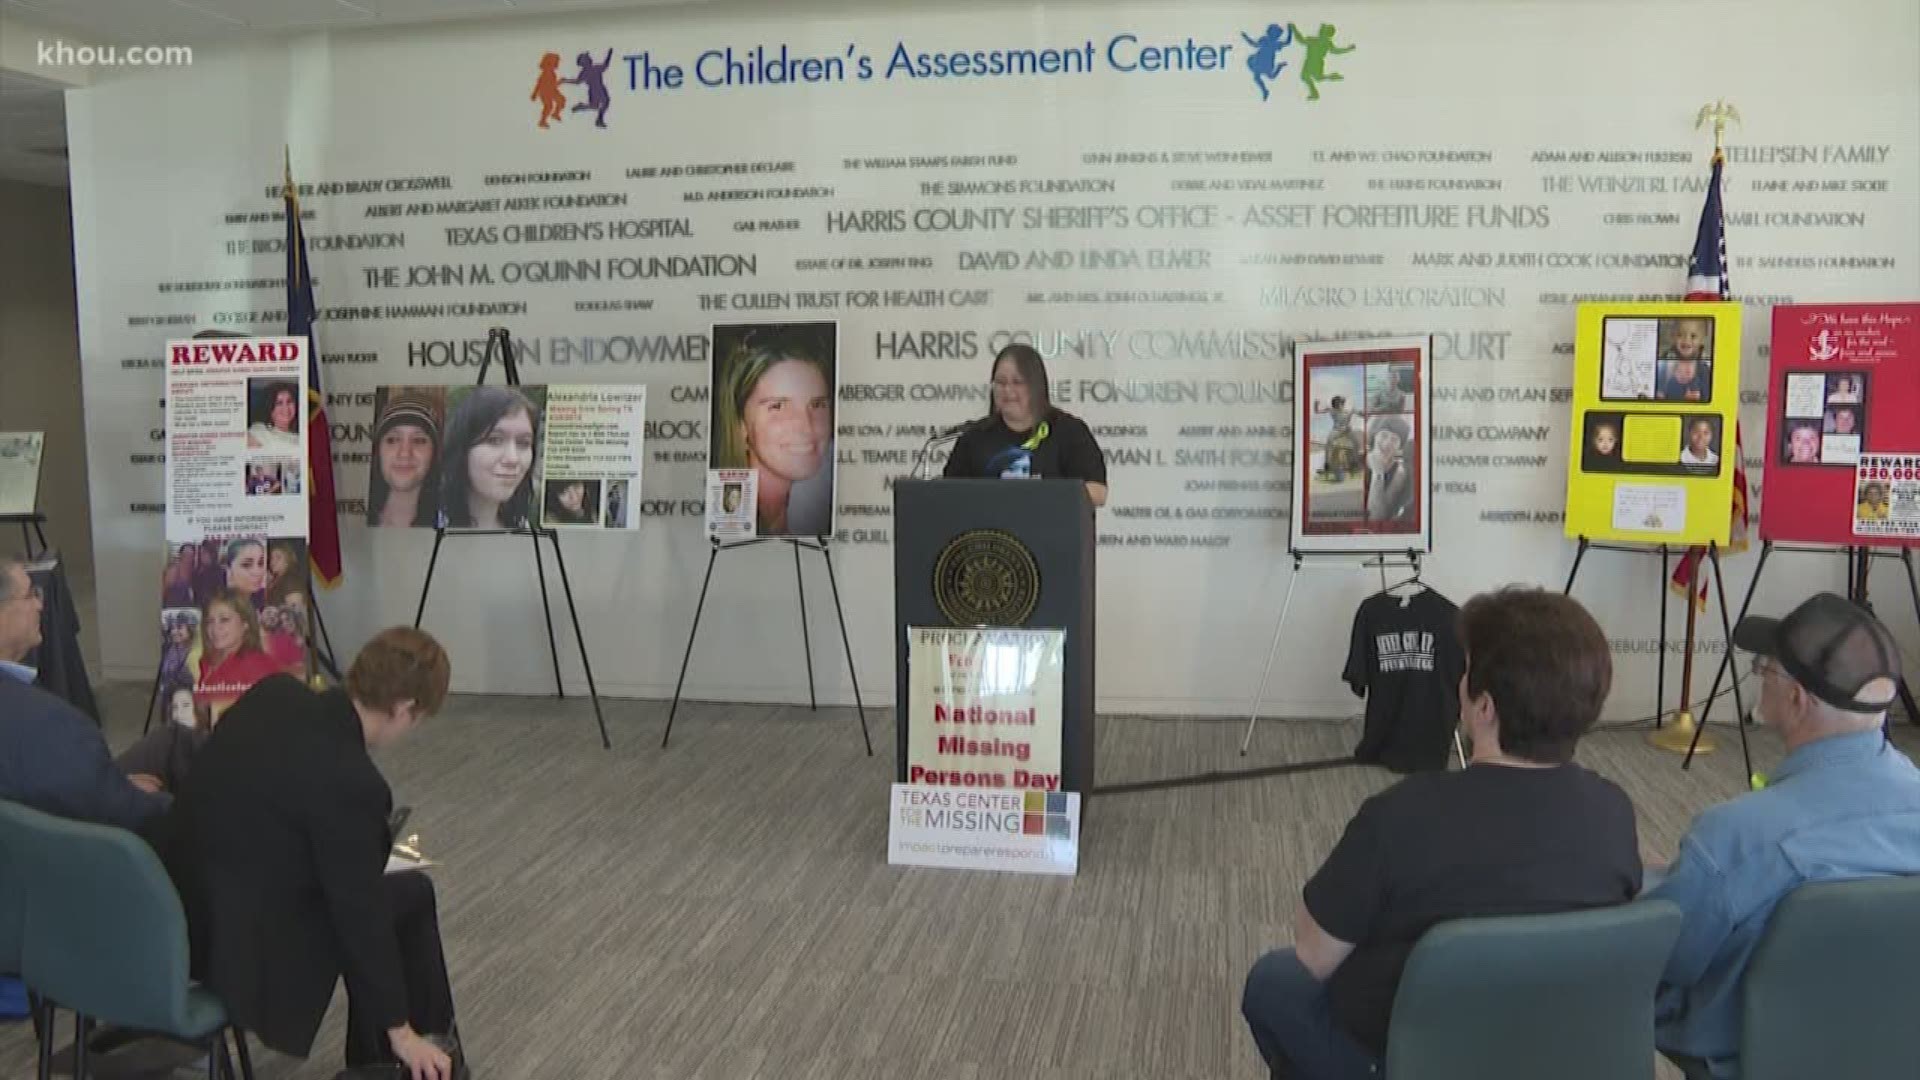 Families from throughout Texas met in Houston to share stories of their loved ones who disappeared for National Missing Persons Day.